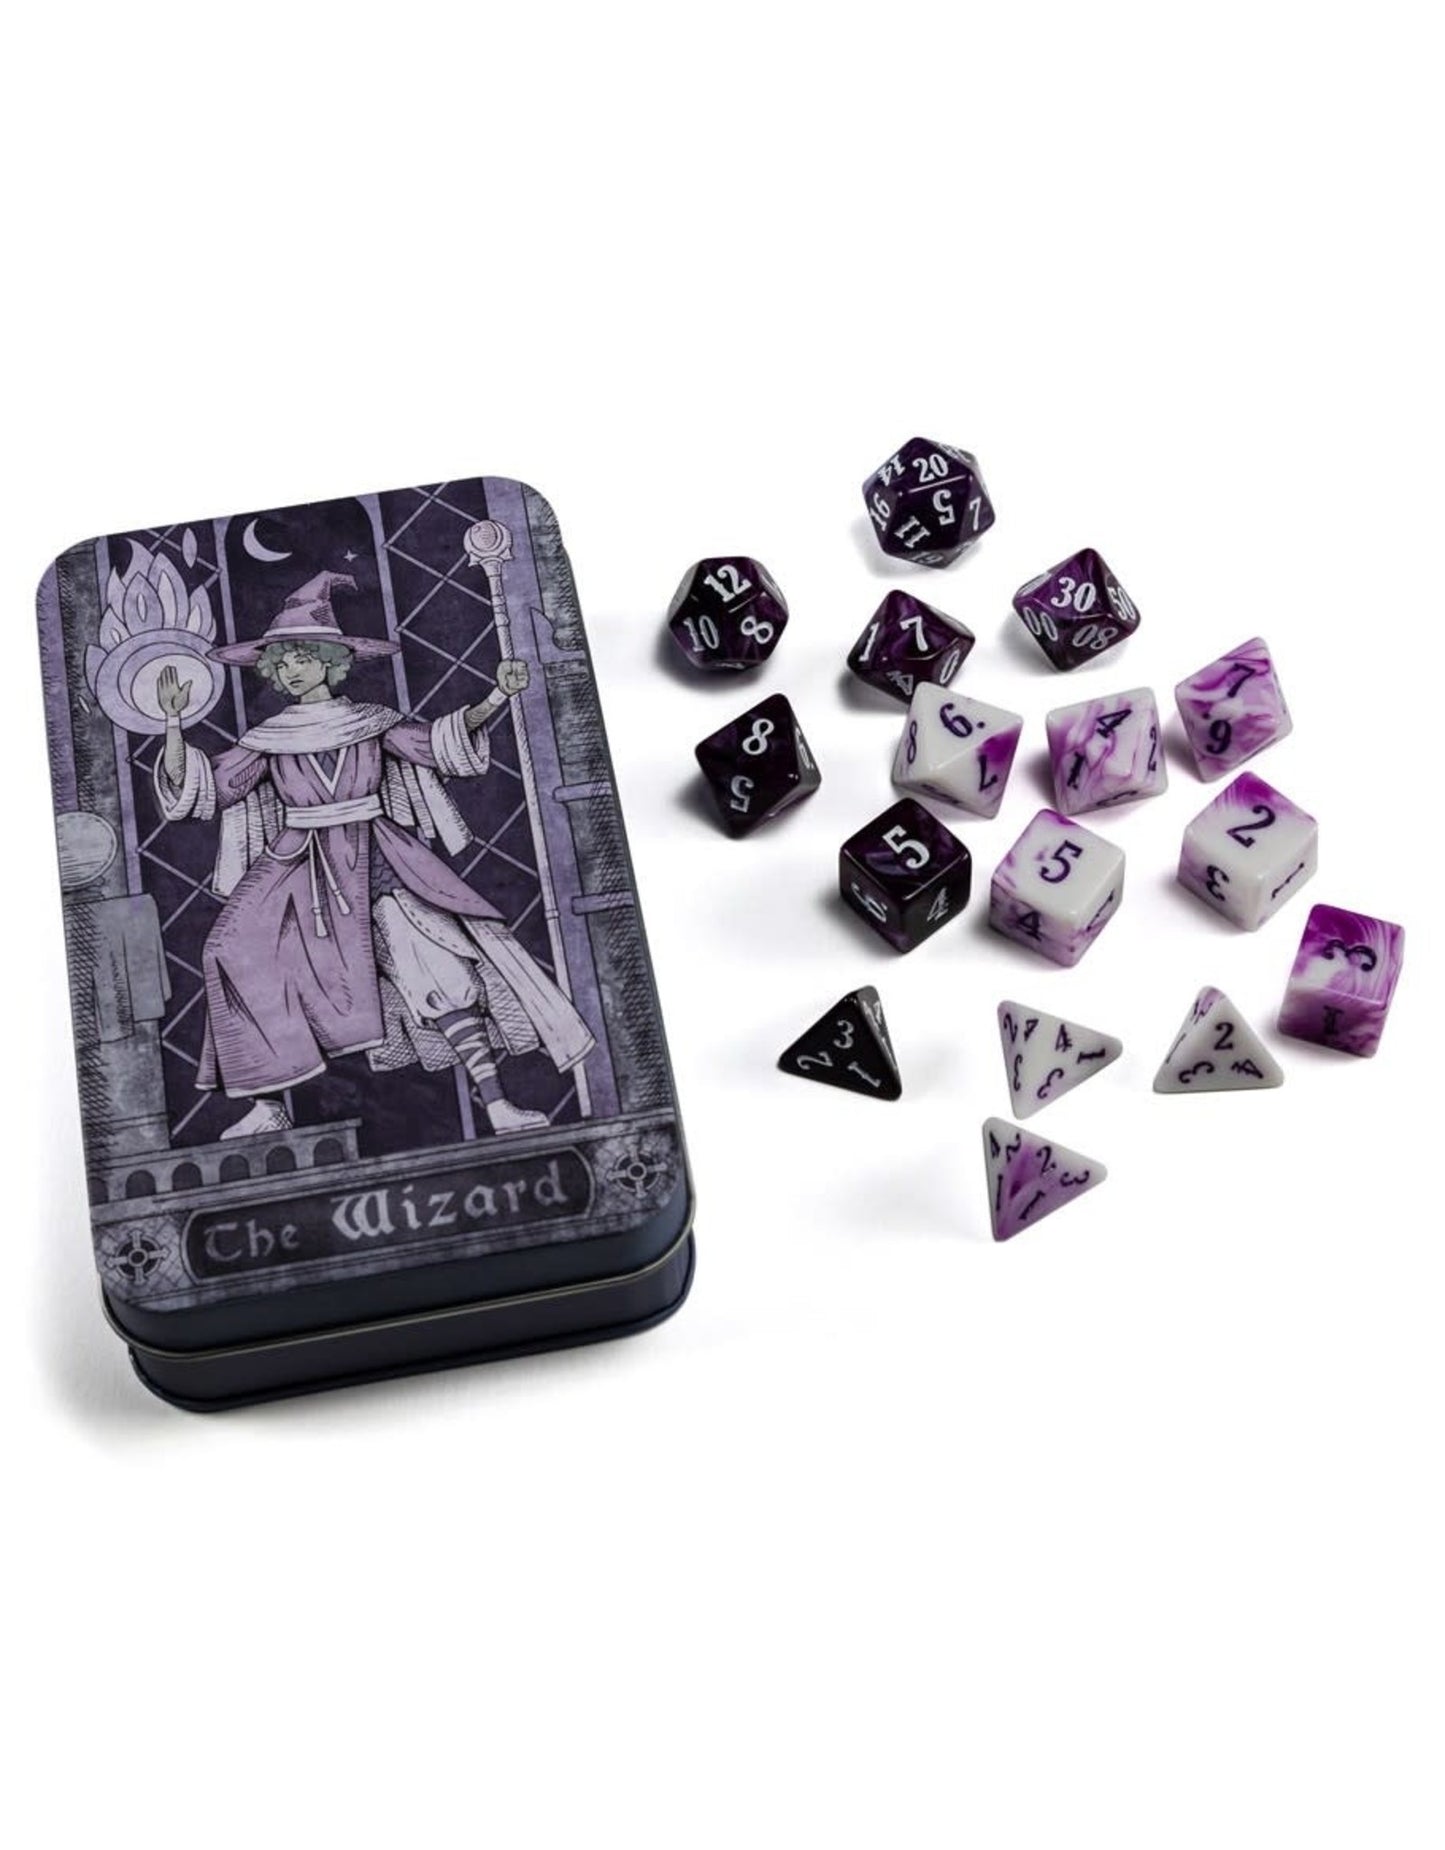 Class-Specific Dice Set - The Wizard